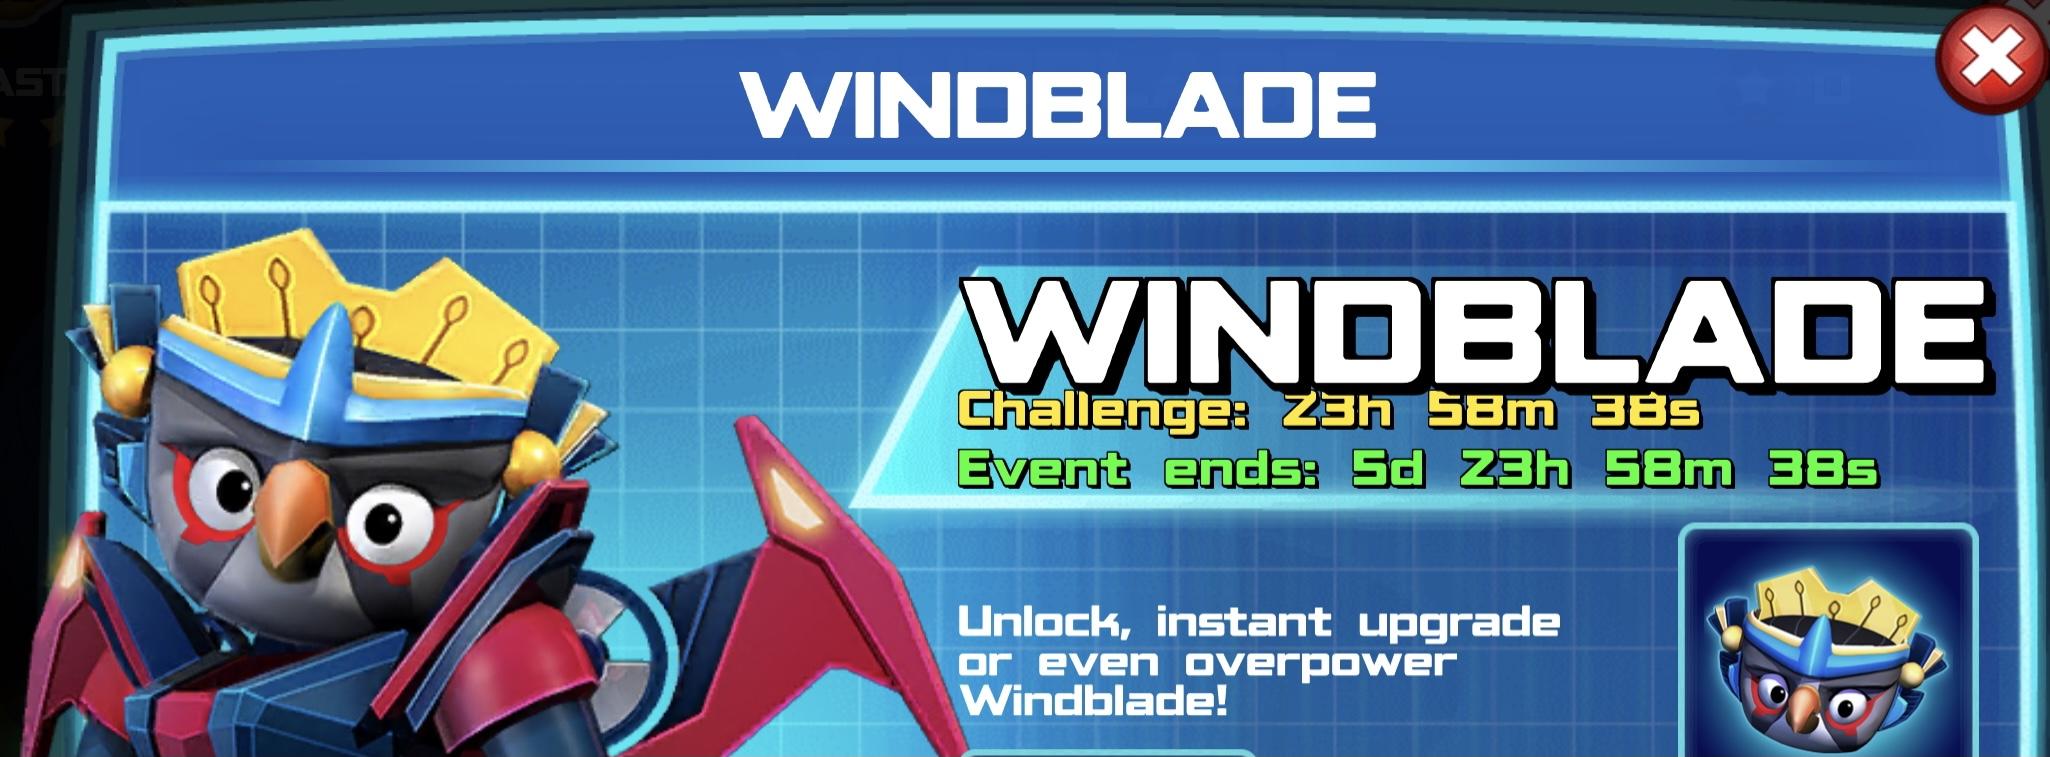 The event banner for Windblade